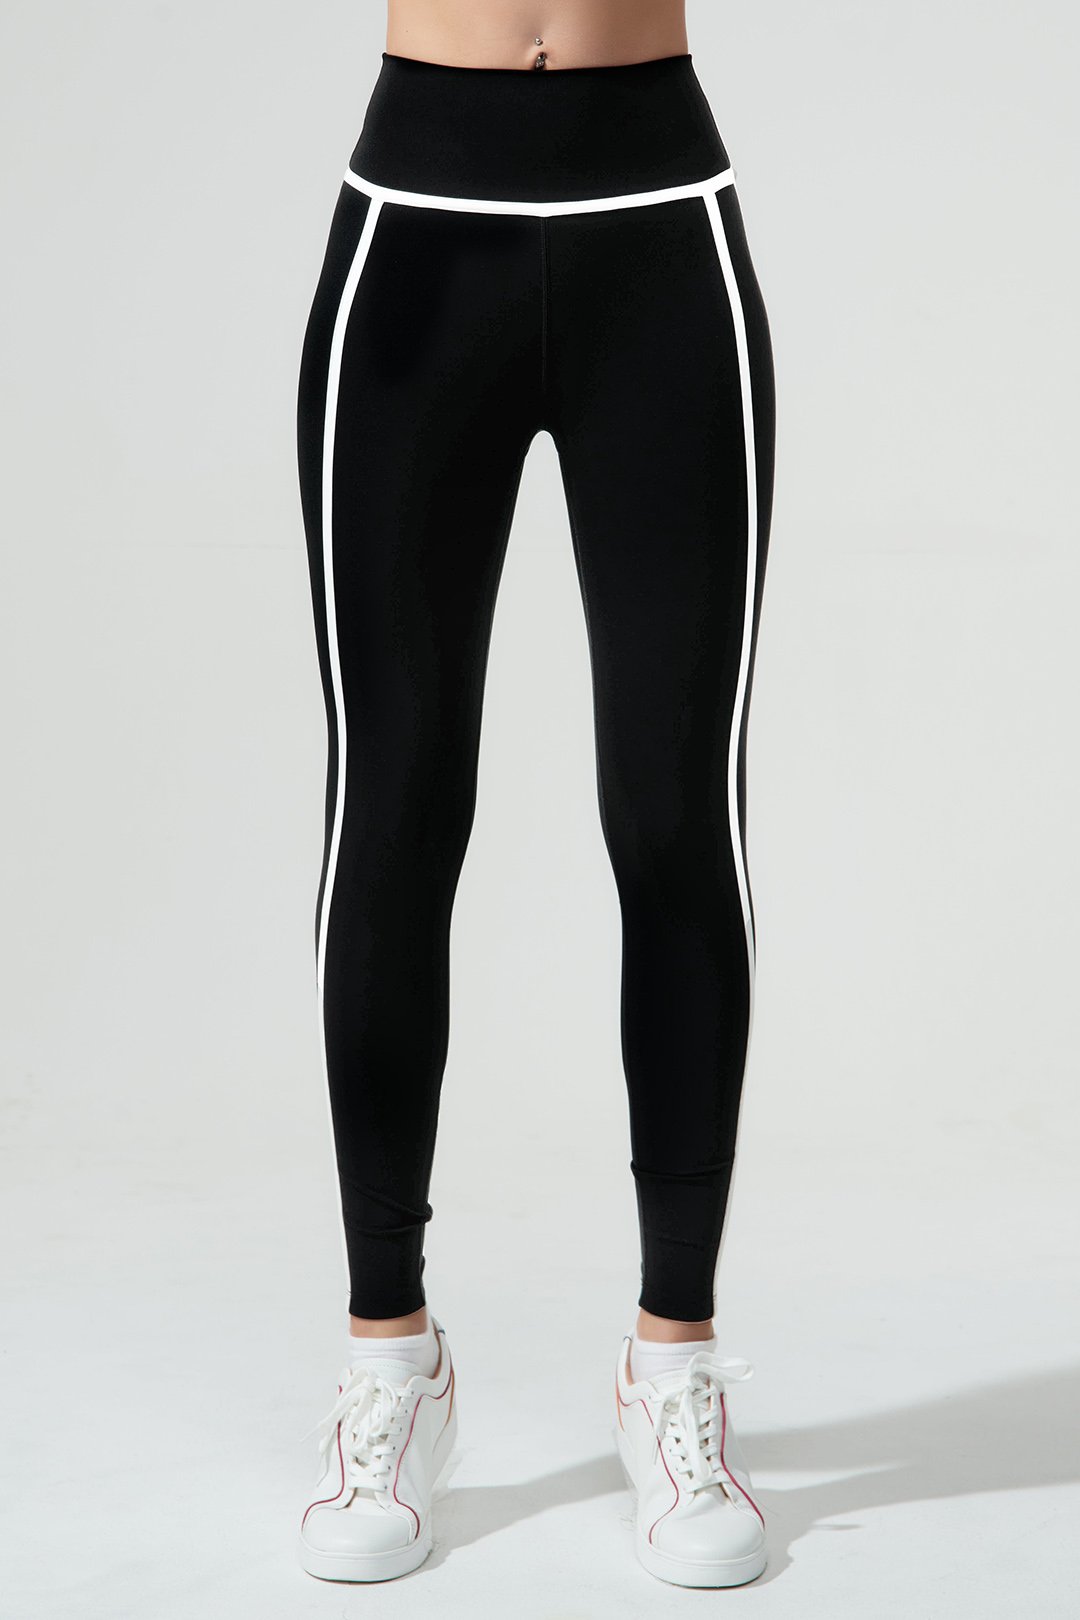 Stylish black women's leggings with a jet black shade, perfect for a trendy look.